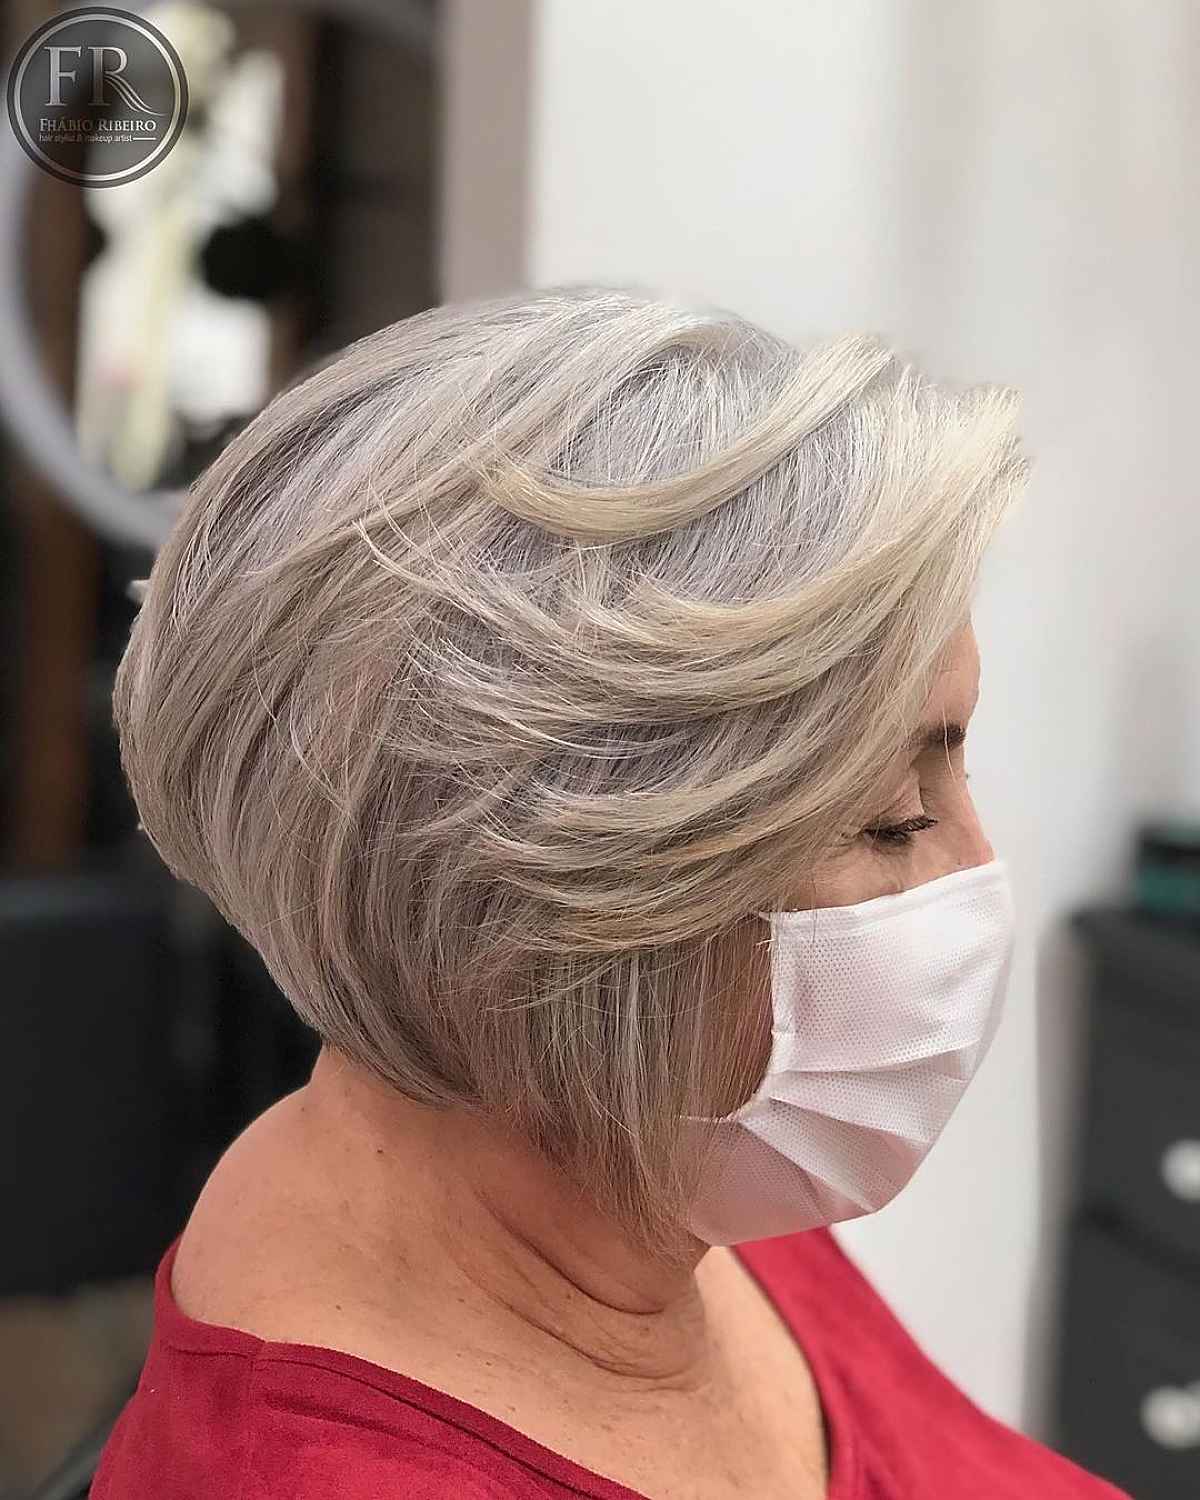 21 Short, Stacked Inverted Bob Haircut Ideas to Spice Up Your Style